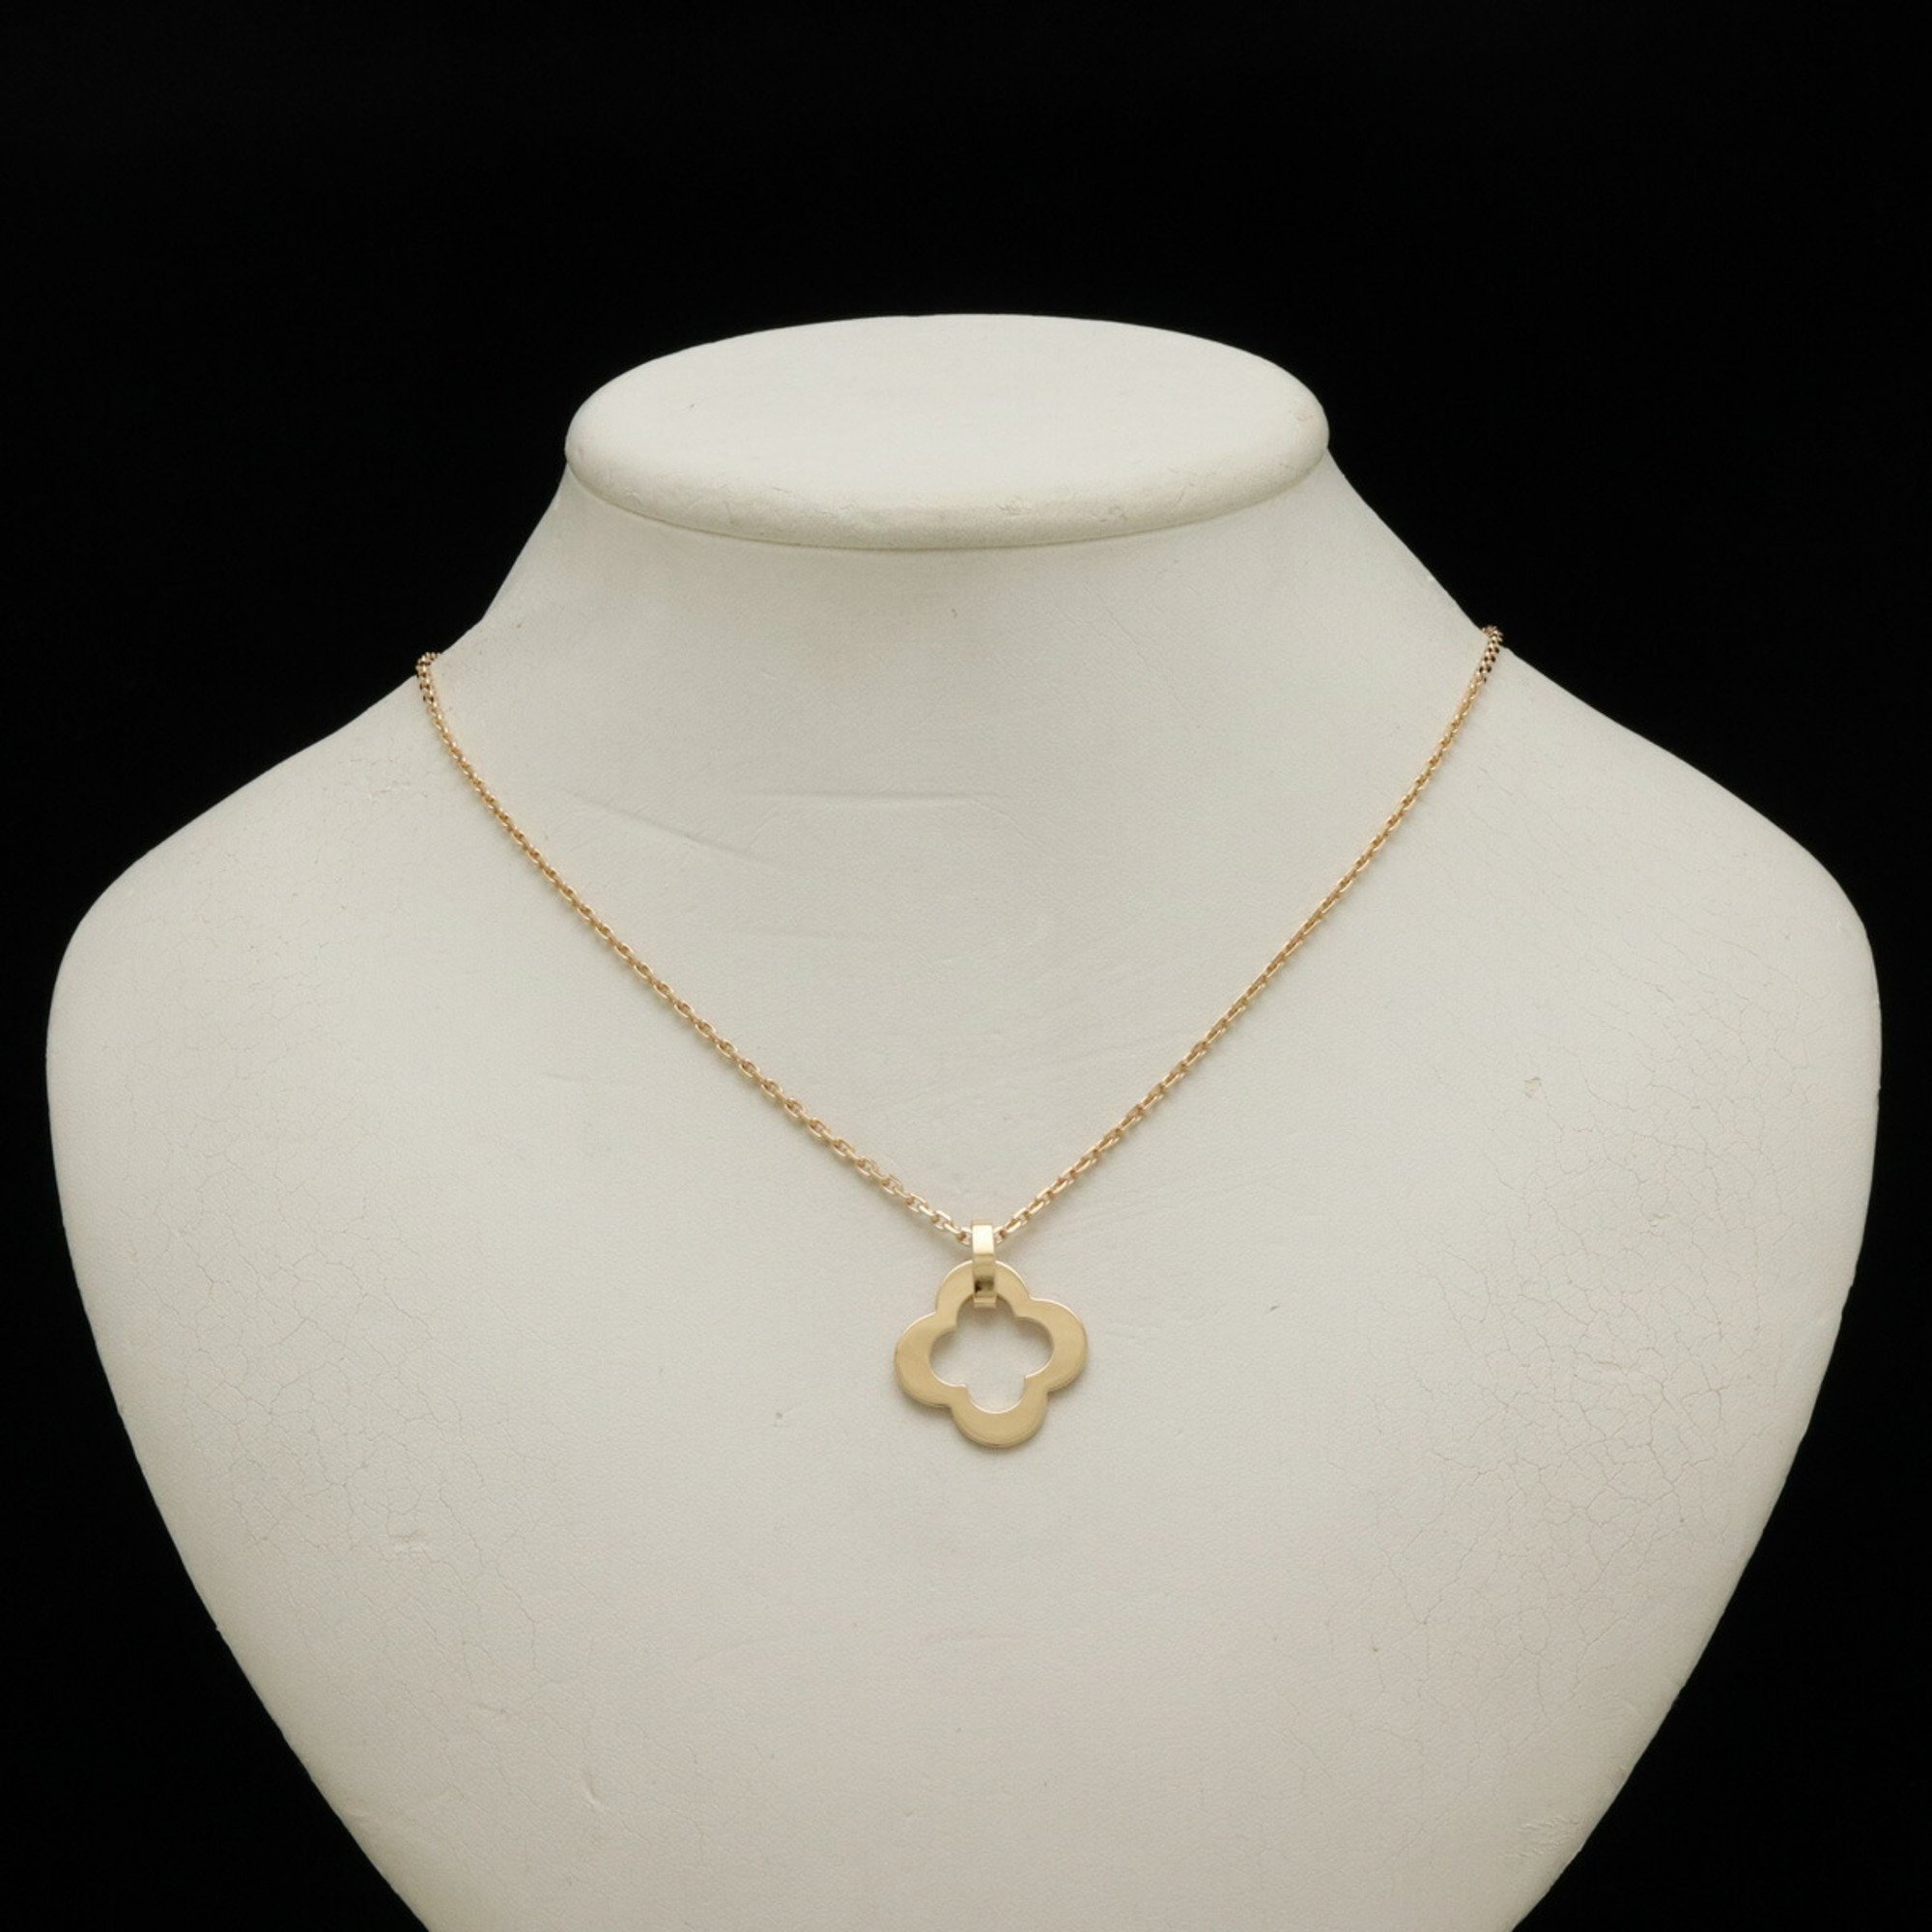 Finished Van Cleef & Arpels Byzantine Alhambra Pendant Necklace K18YG Yellow Gold VCARD38900